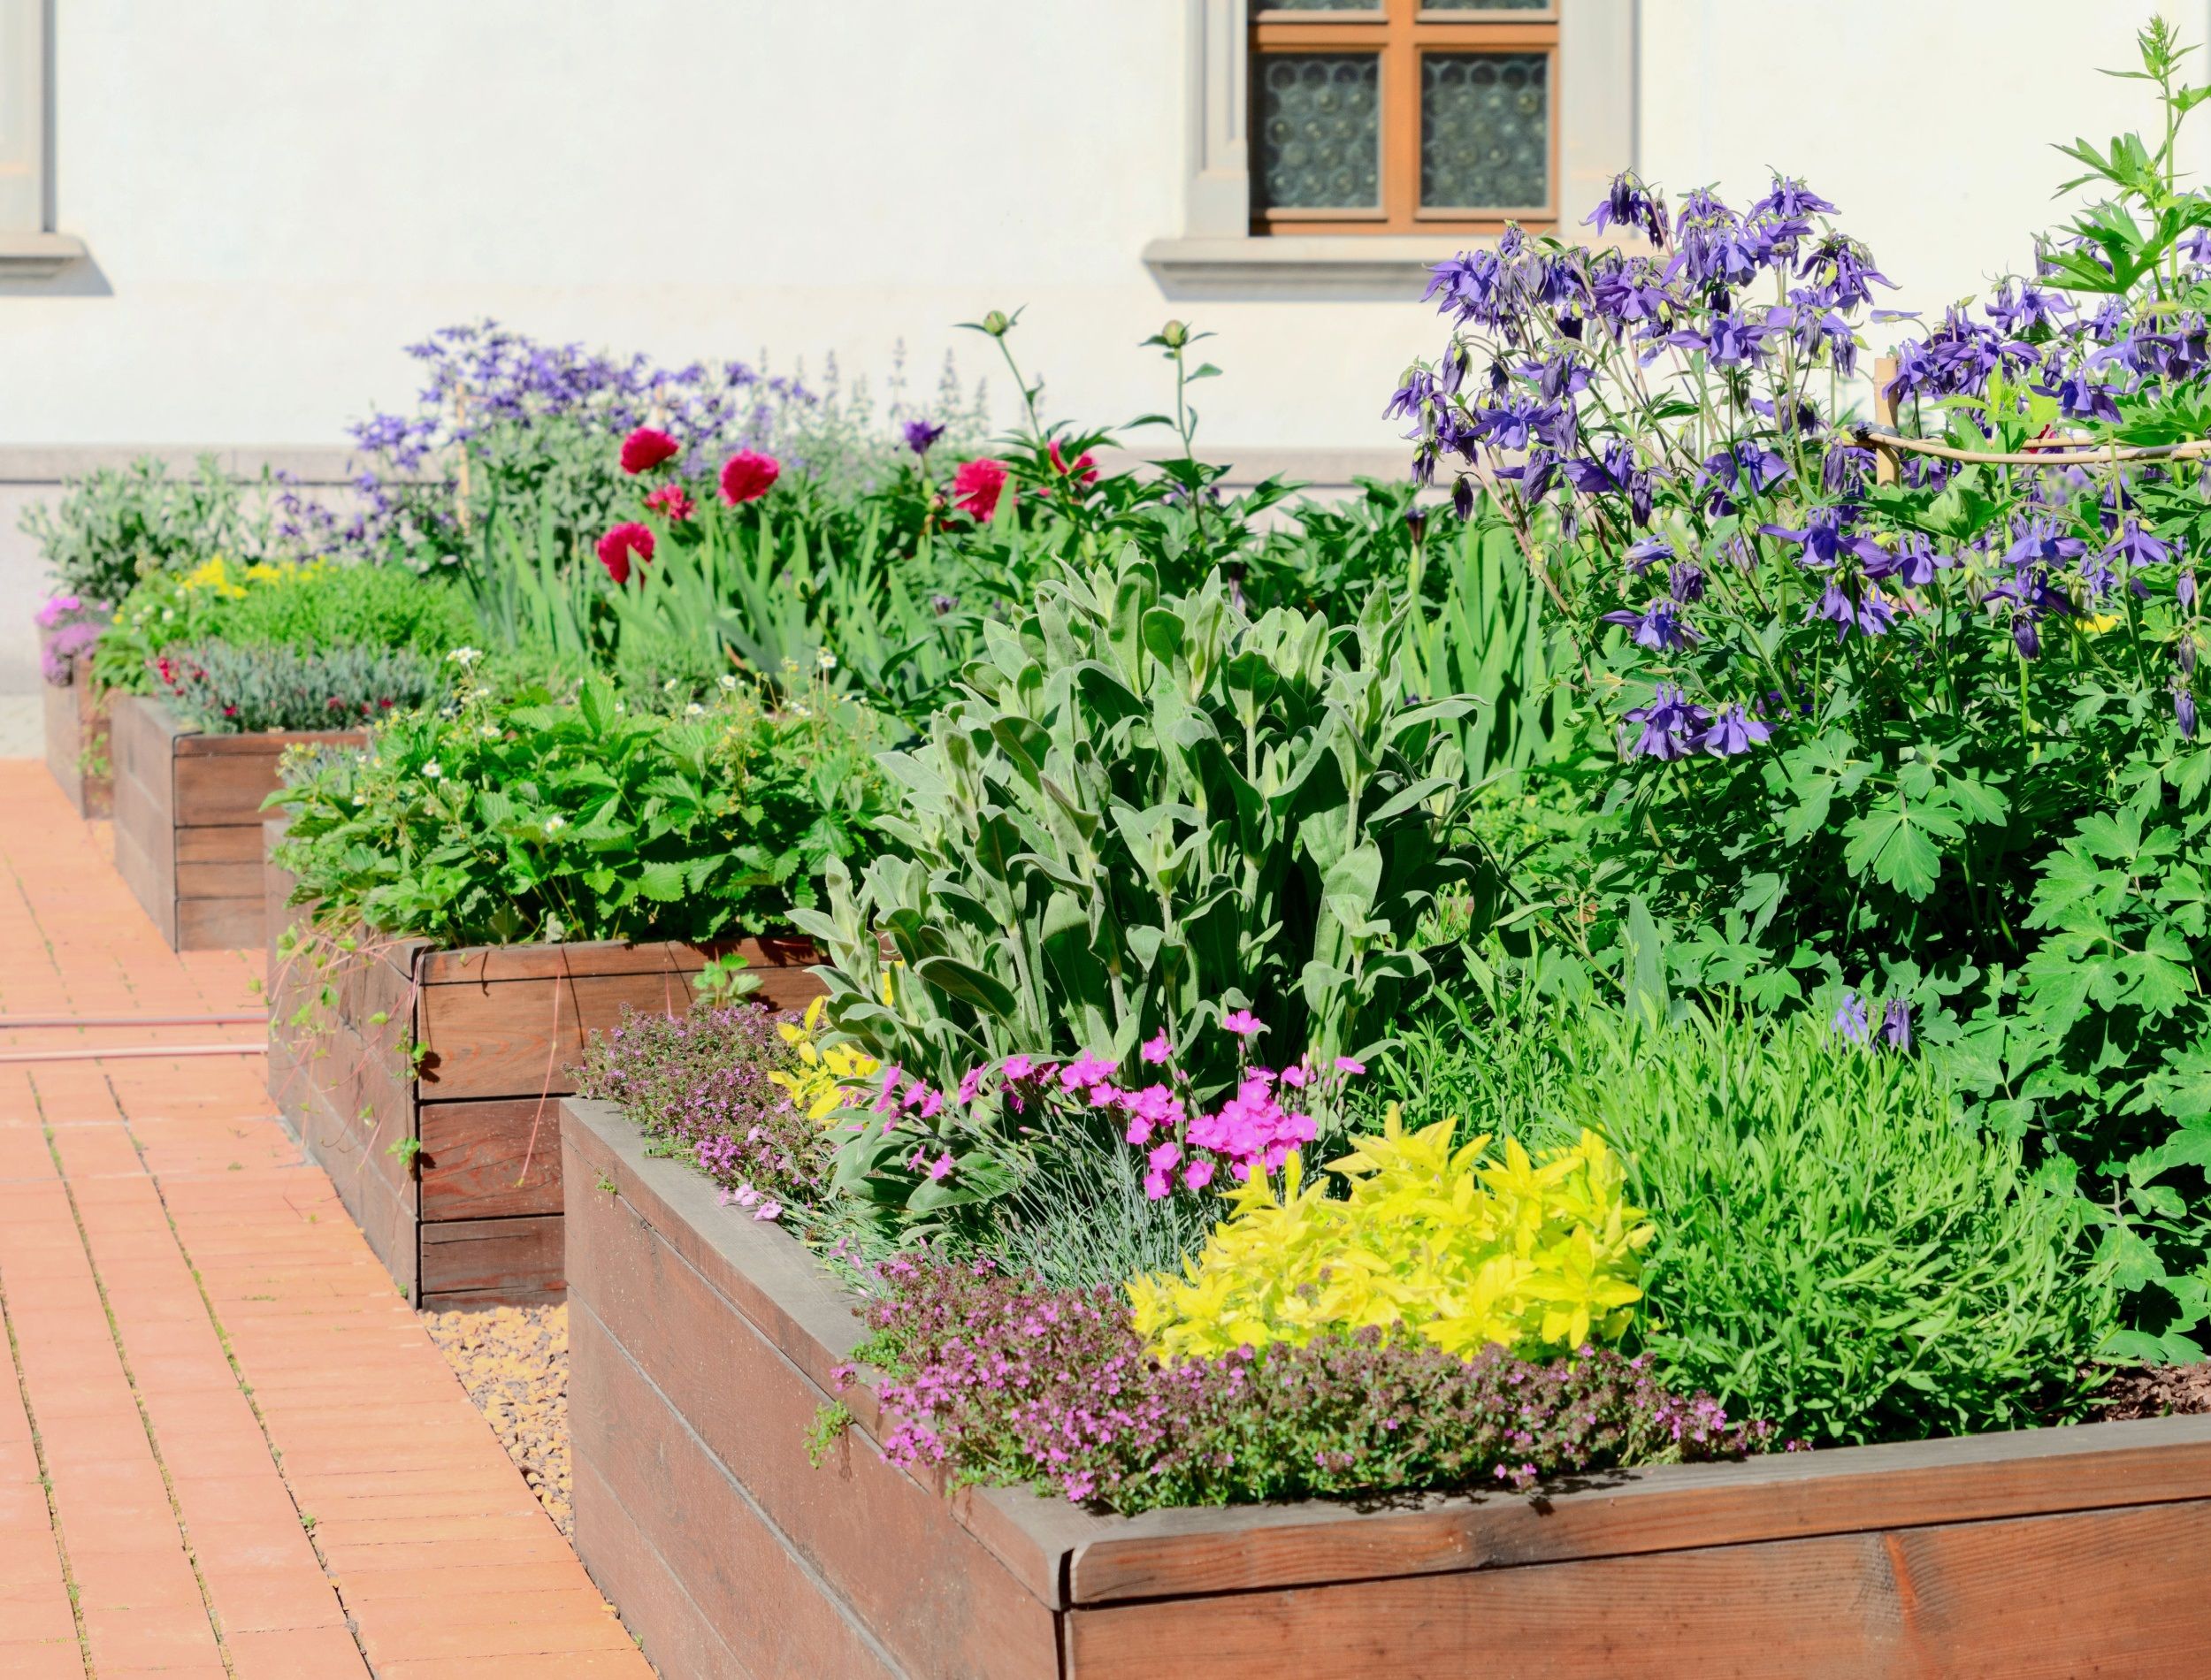 Raised beds in an urban garden growing plants flowers, herbs spices and berries